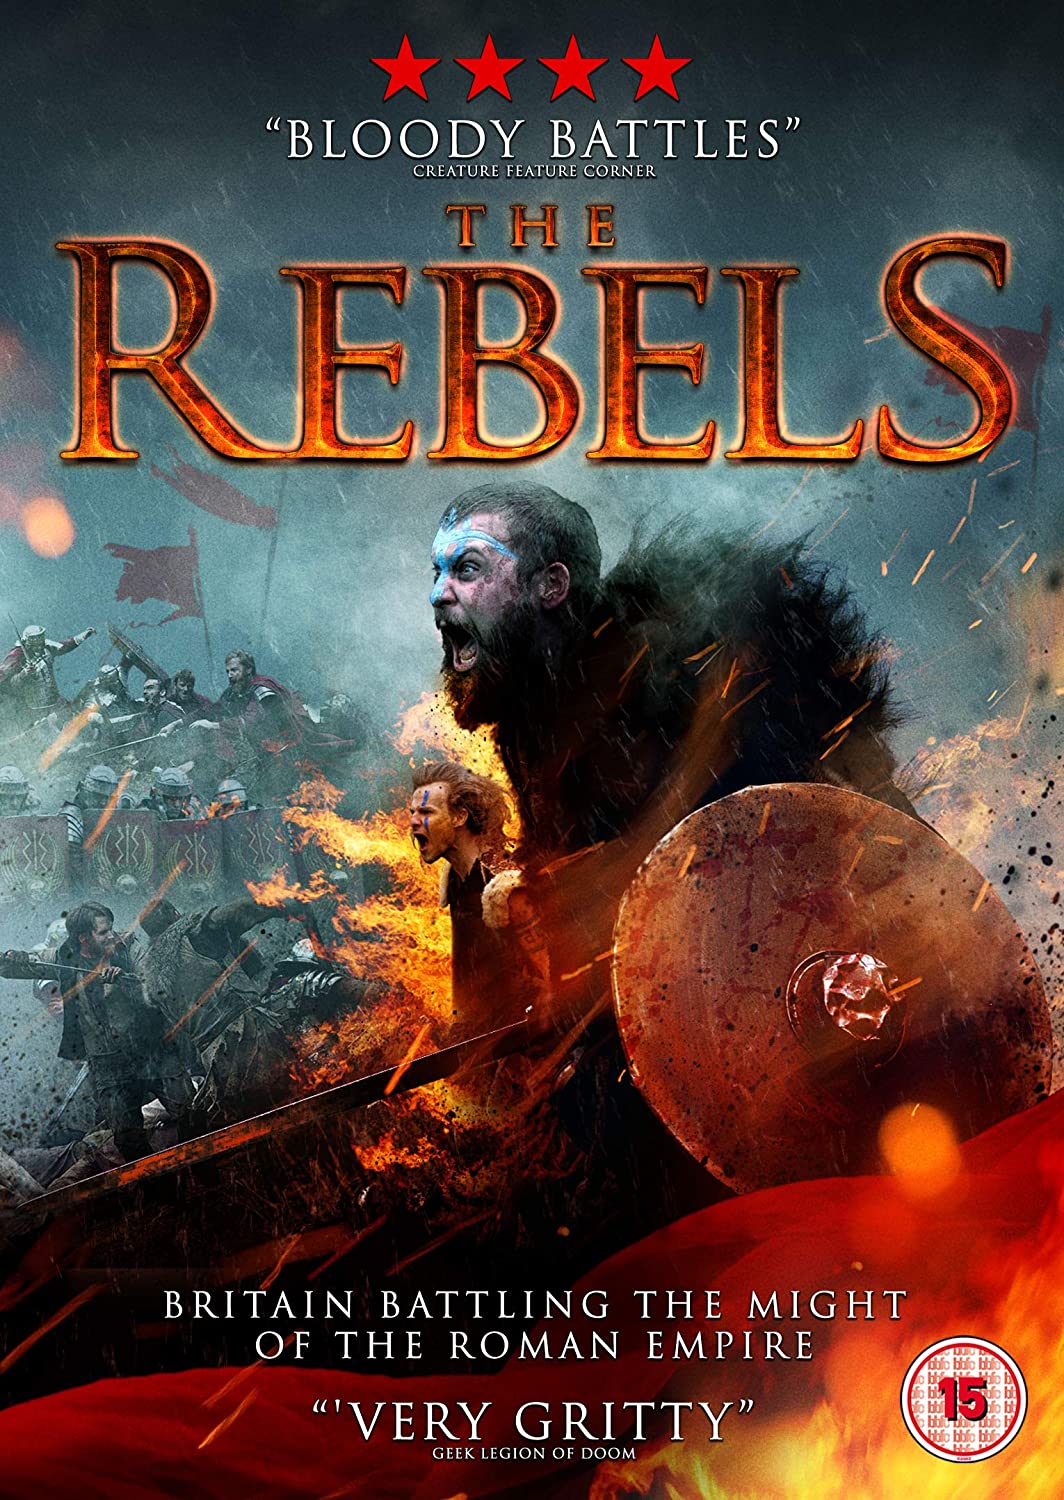 The Rebels [DVD]